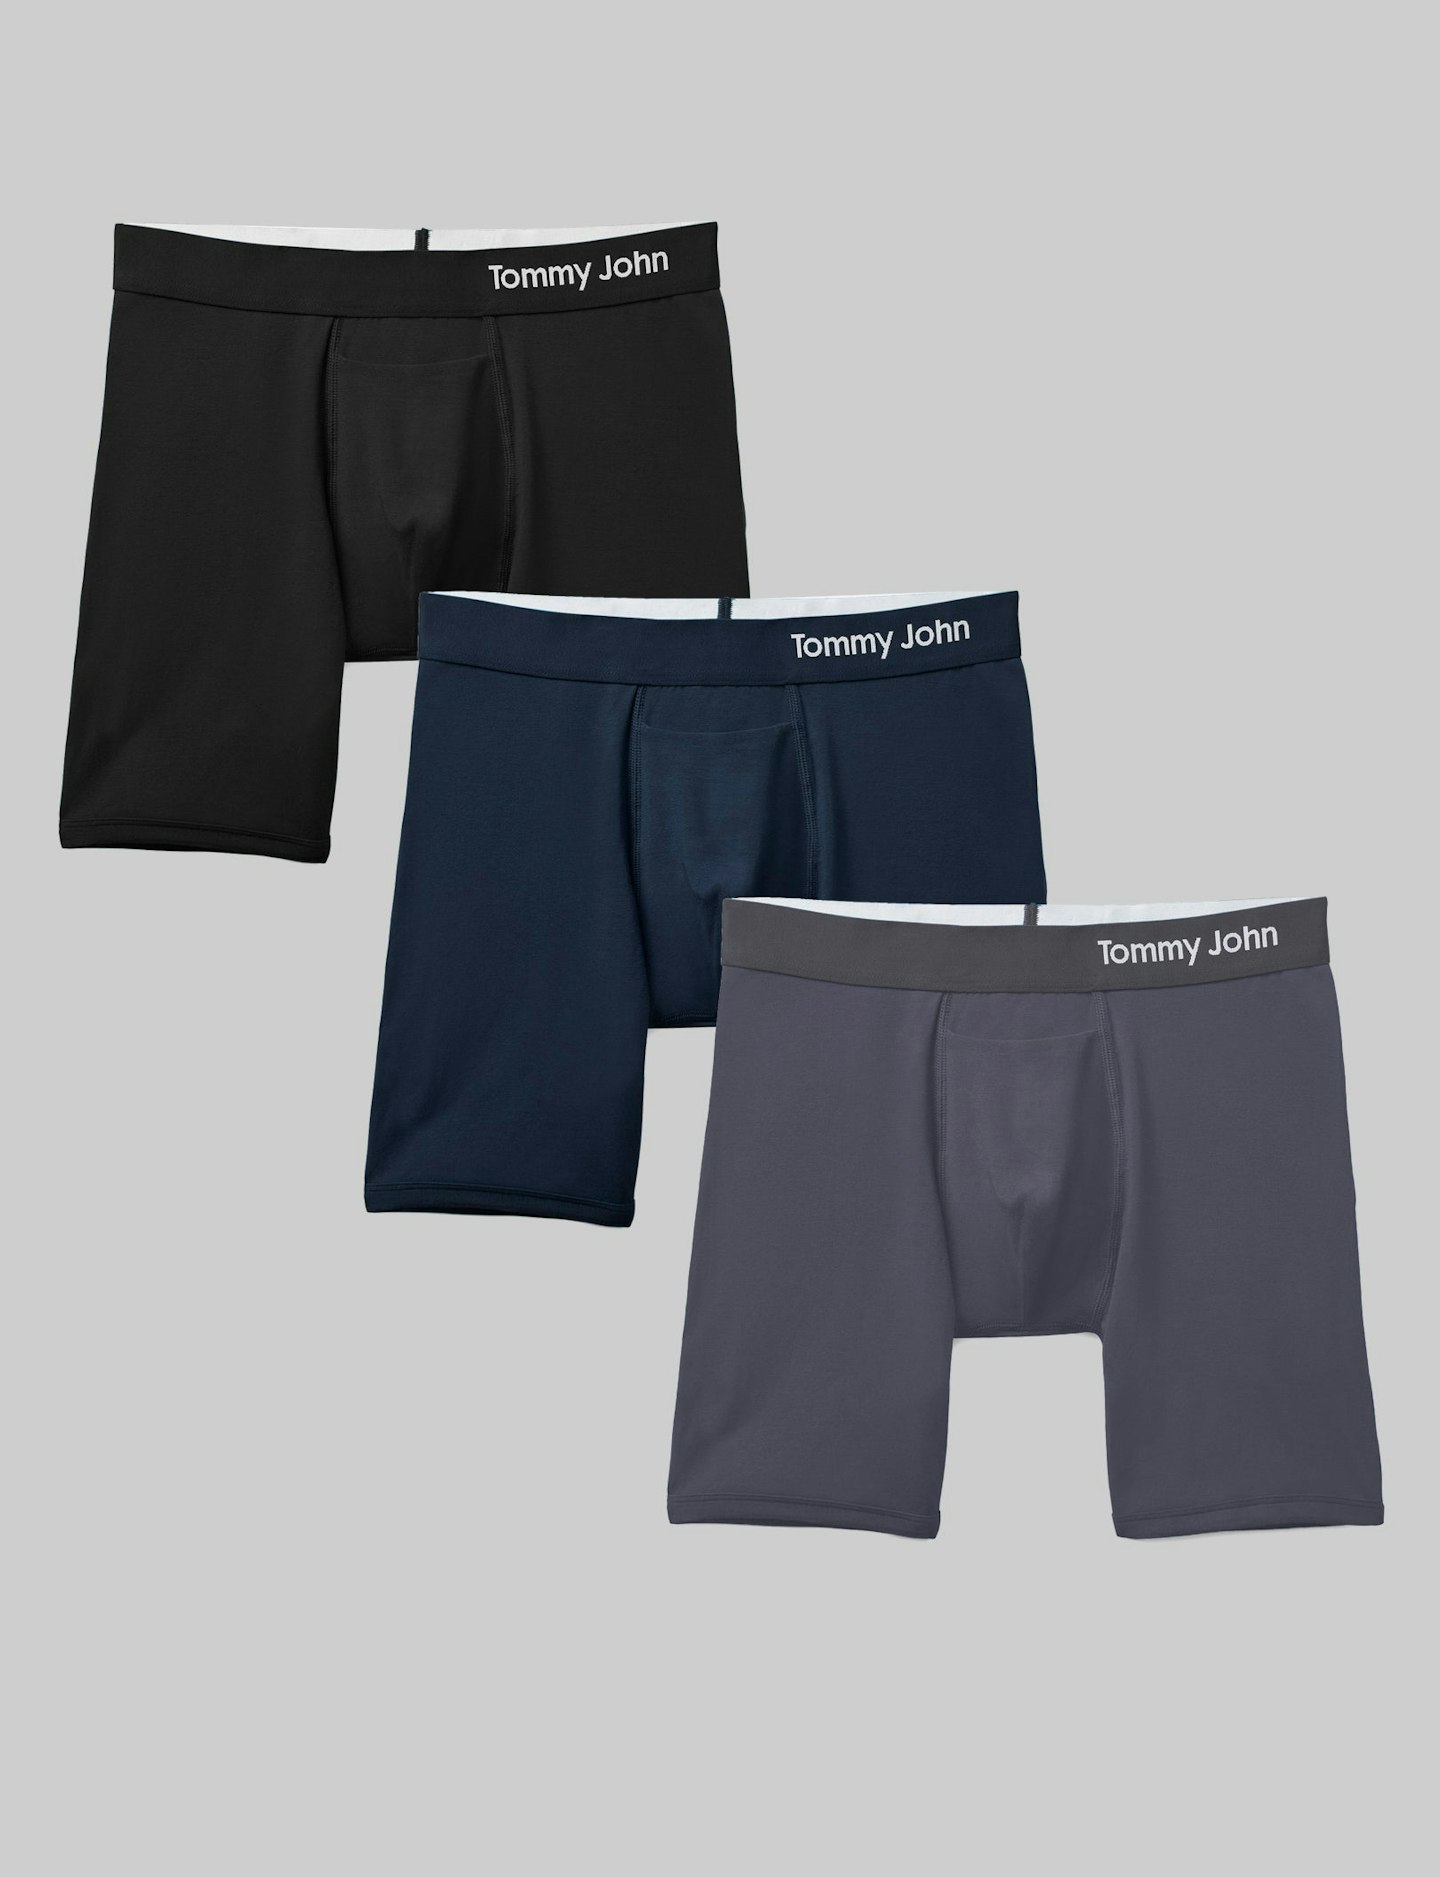  Tommy John Mens Mid-Length Boxer Brief 6 - 4 Pack